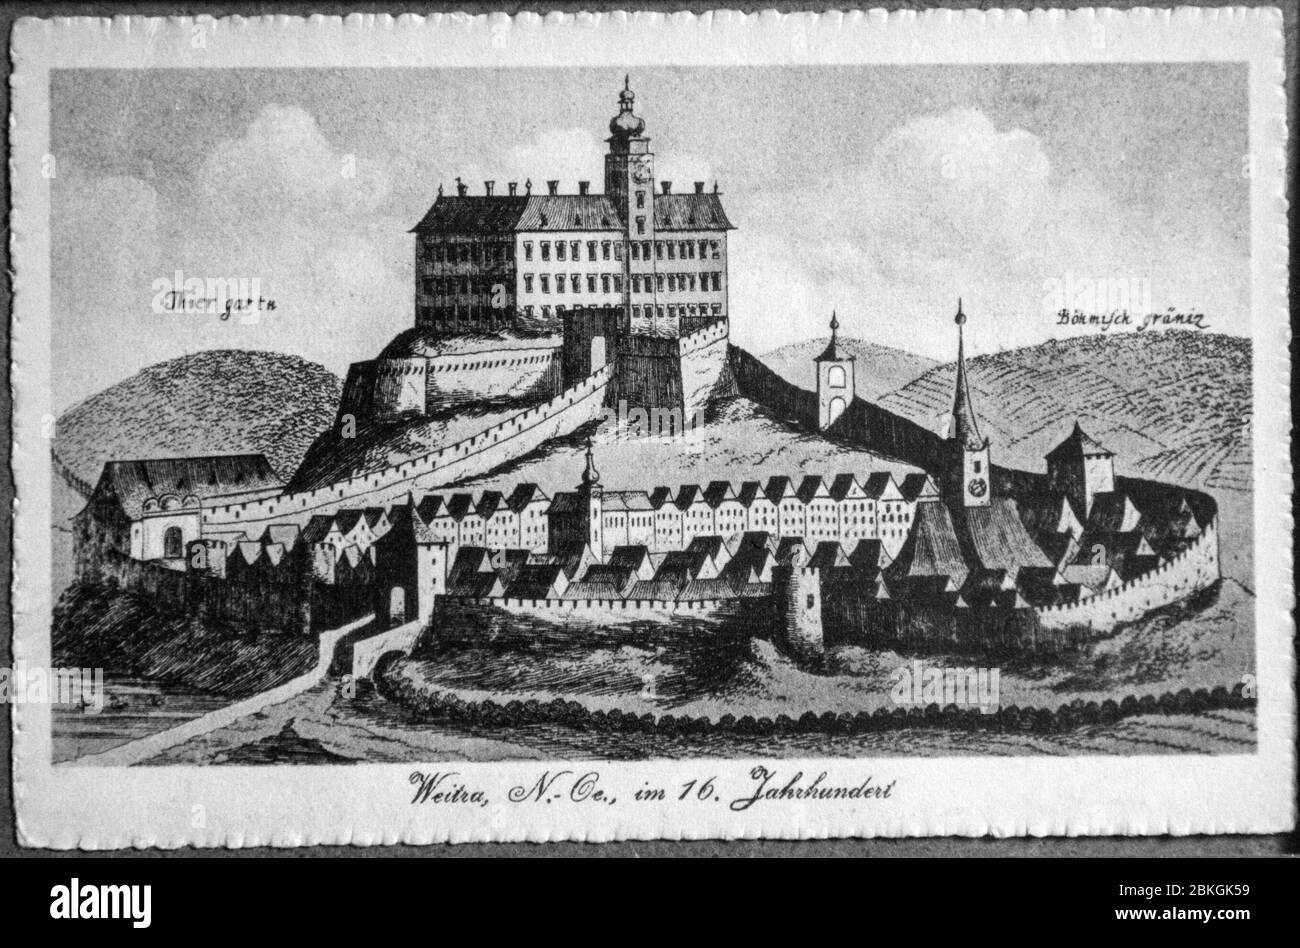 Historic postcard of Weitra, Waldviertel, Austria. Lithograph showing Weitra in the 16th century Stock Photo